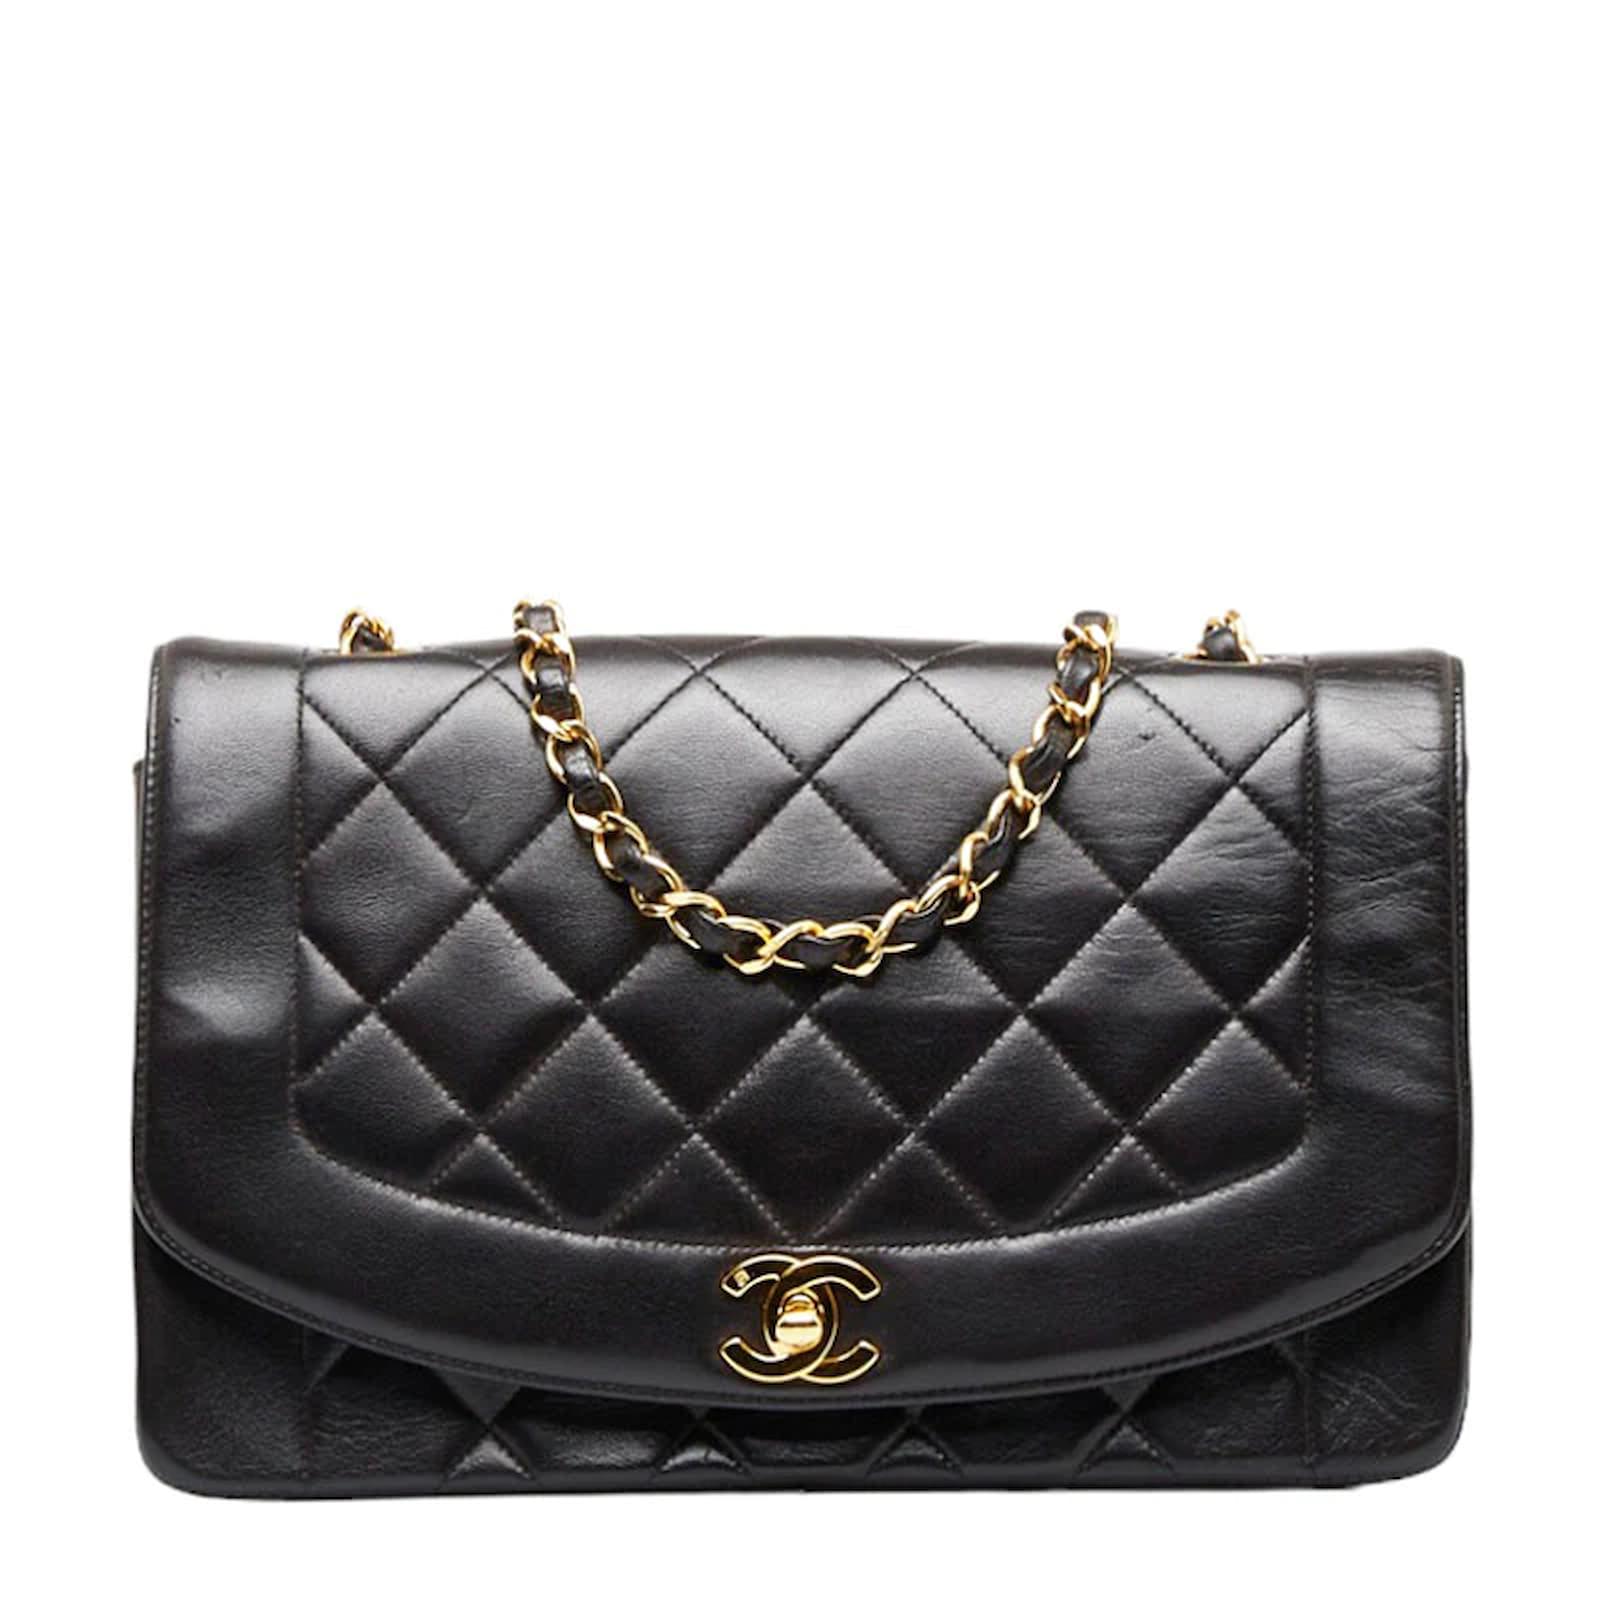 Chanel Pre Owned 1997 small Diana shoulder bag - ShopStyle